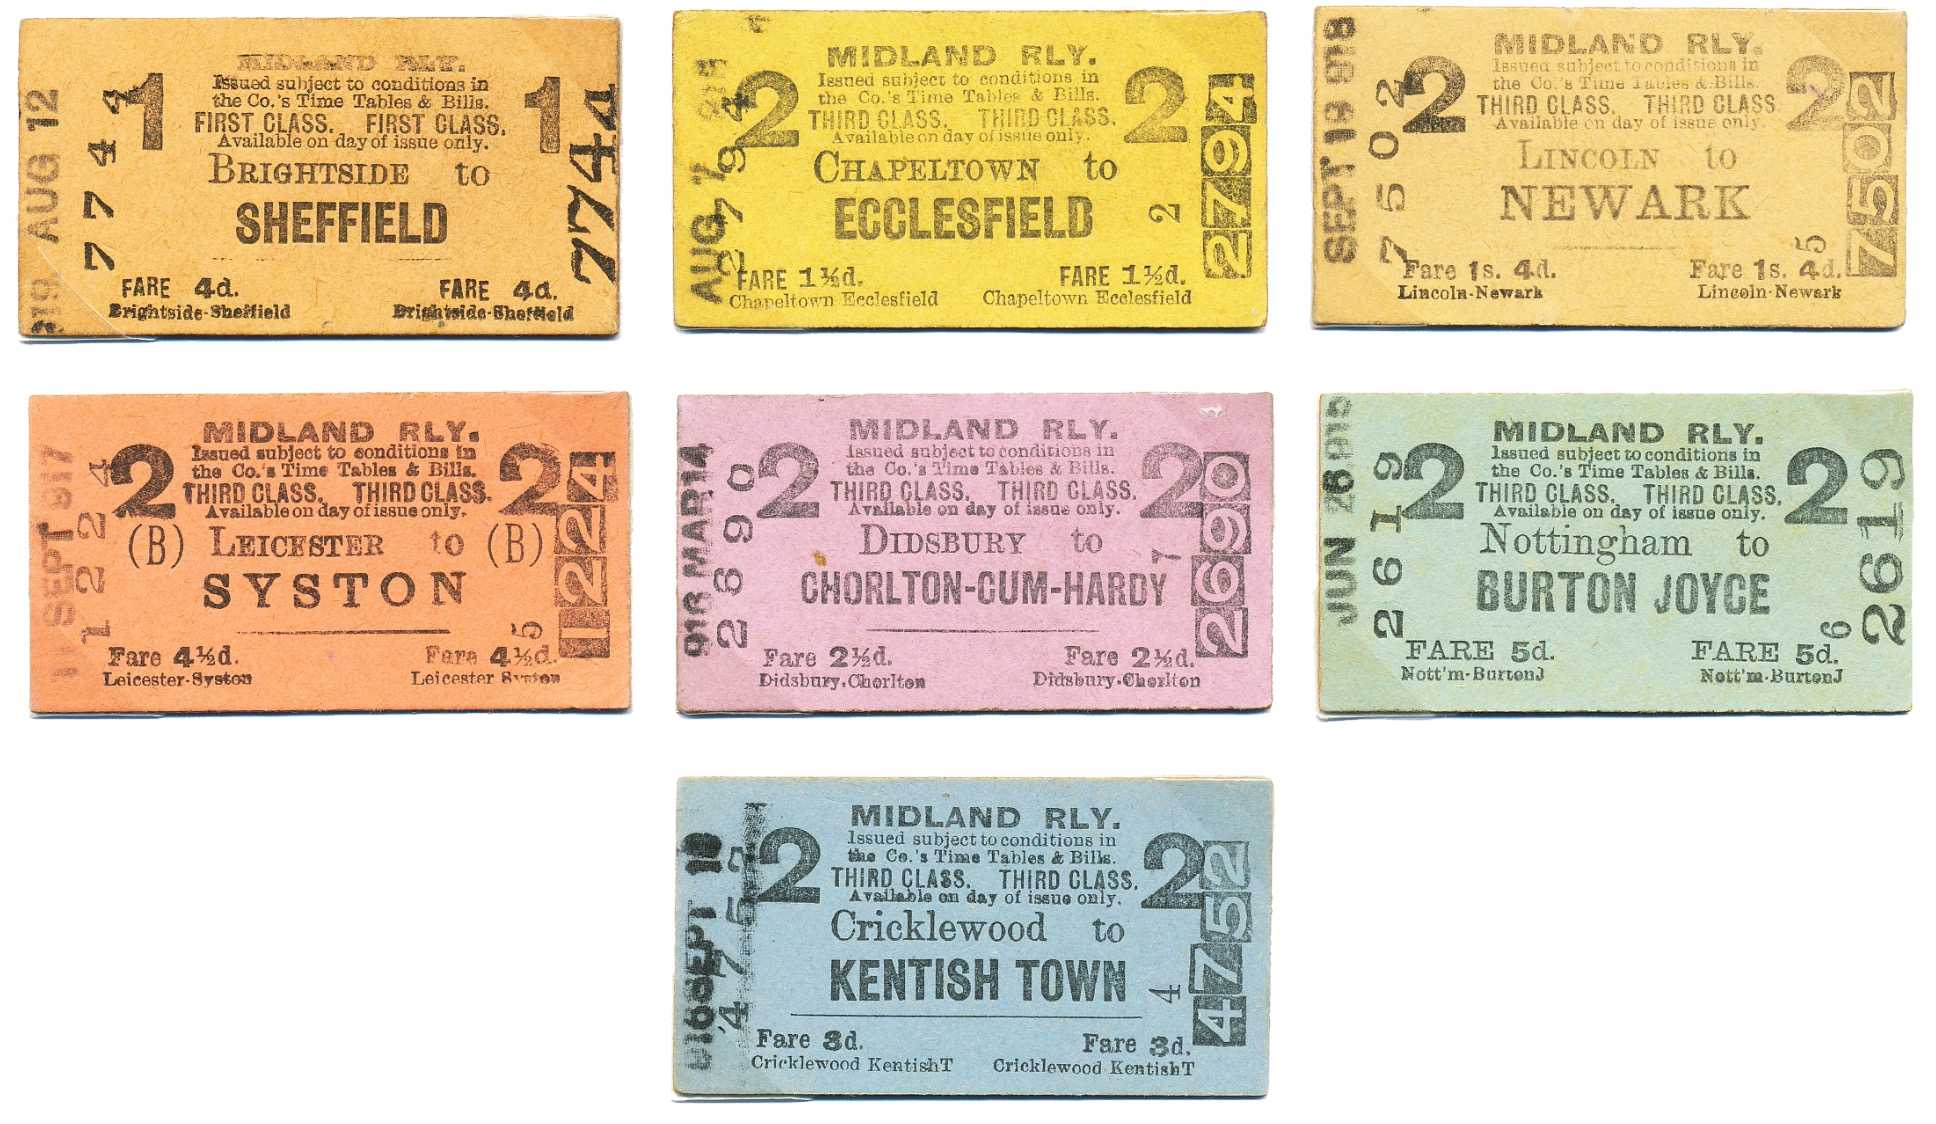 A collection of a dozen rectangular Midland Railway tickets  with a  variety of station names. Bright colours are used including varieties of oranges, yellows, pinks and greens.